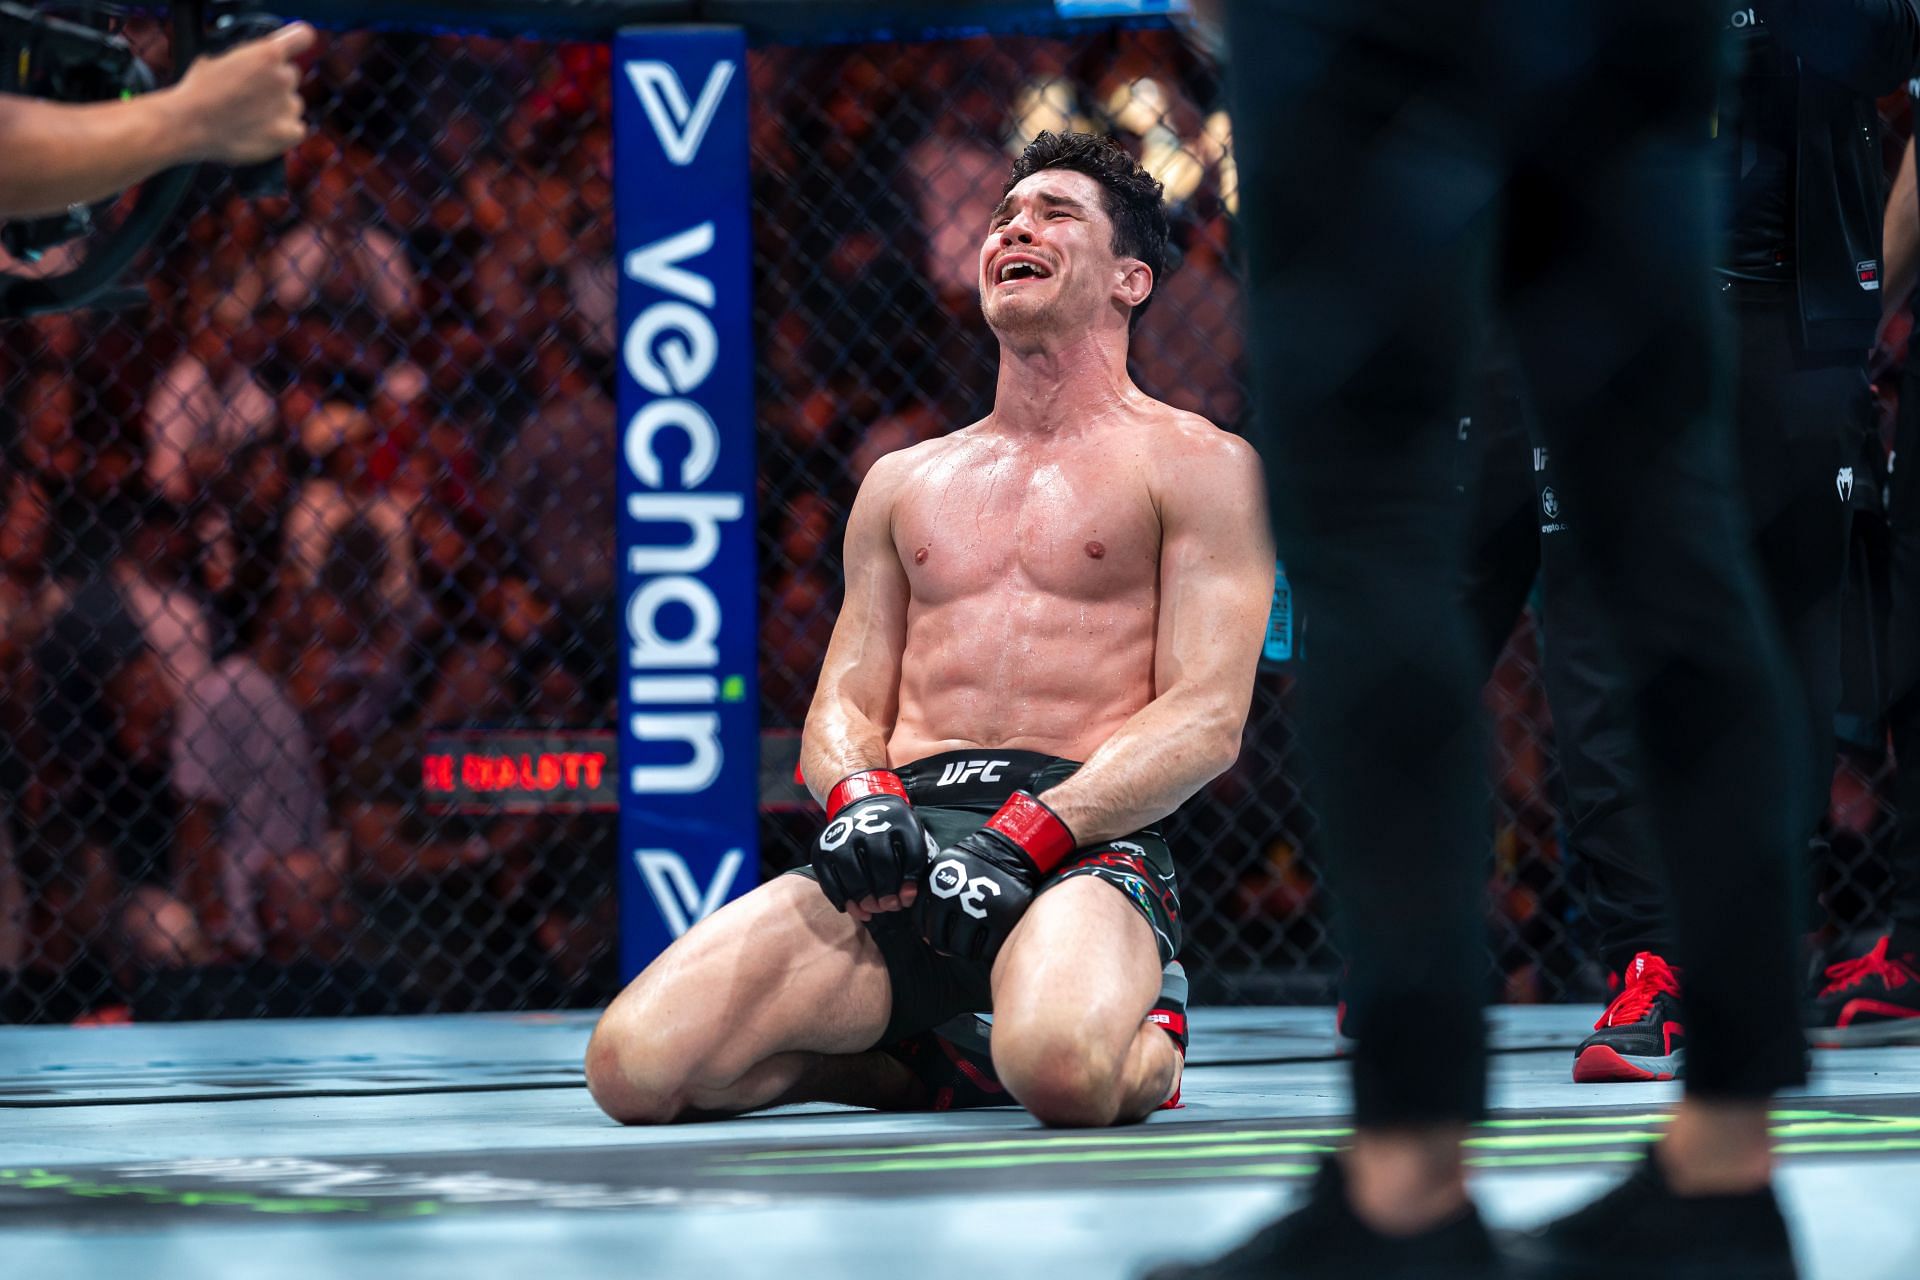 After three octagon wins, Mike Malott&#039;s popularity has skyrocketed